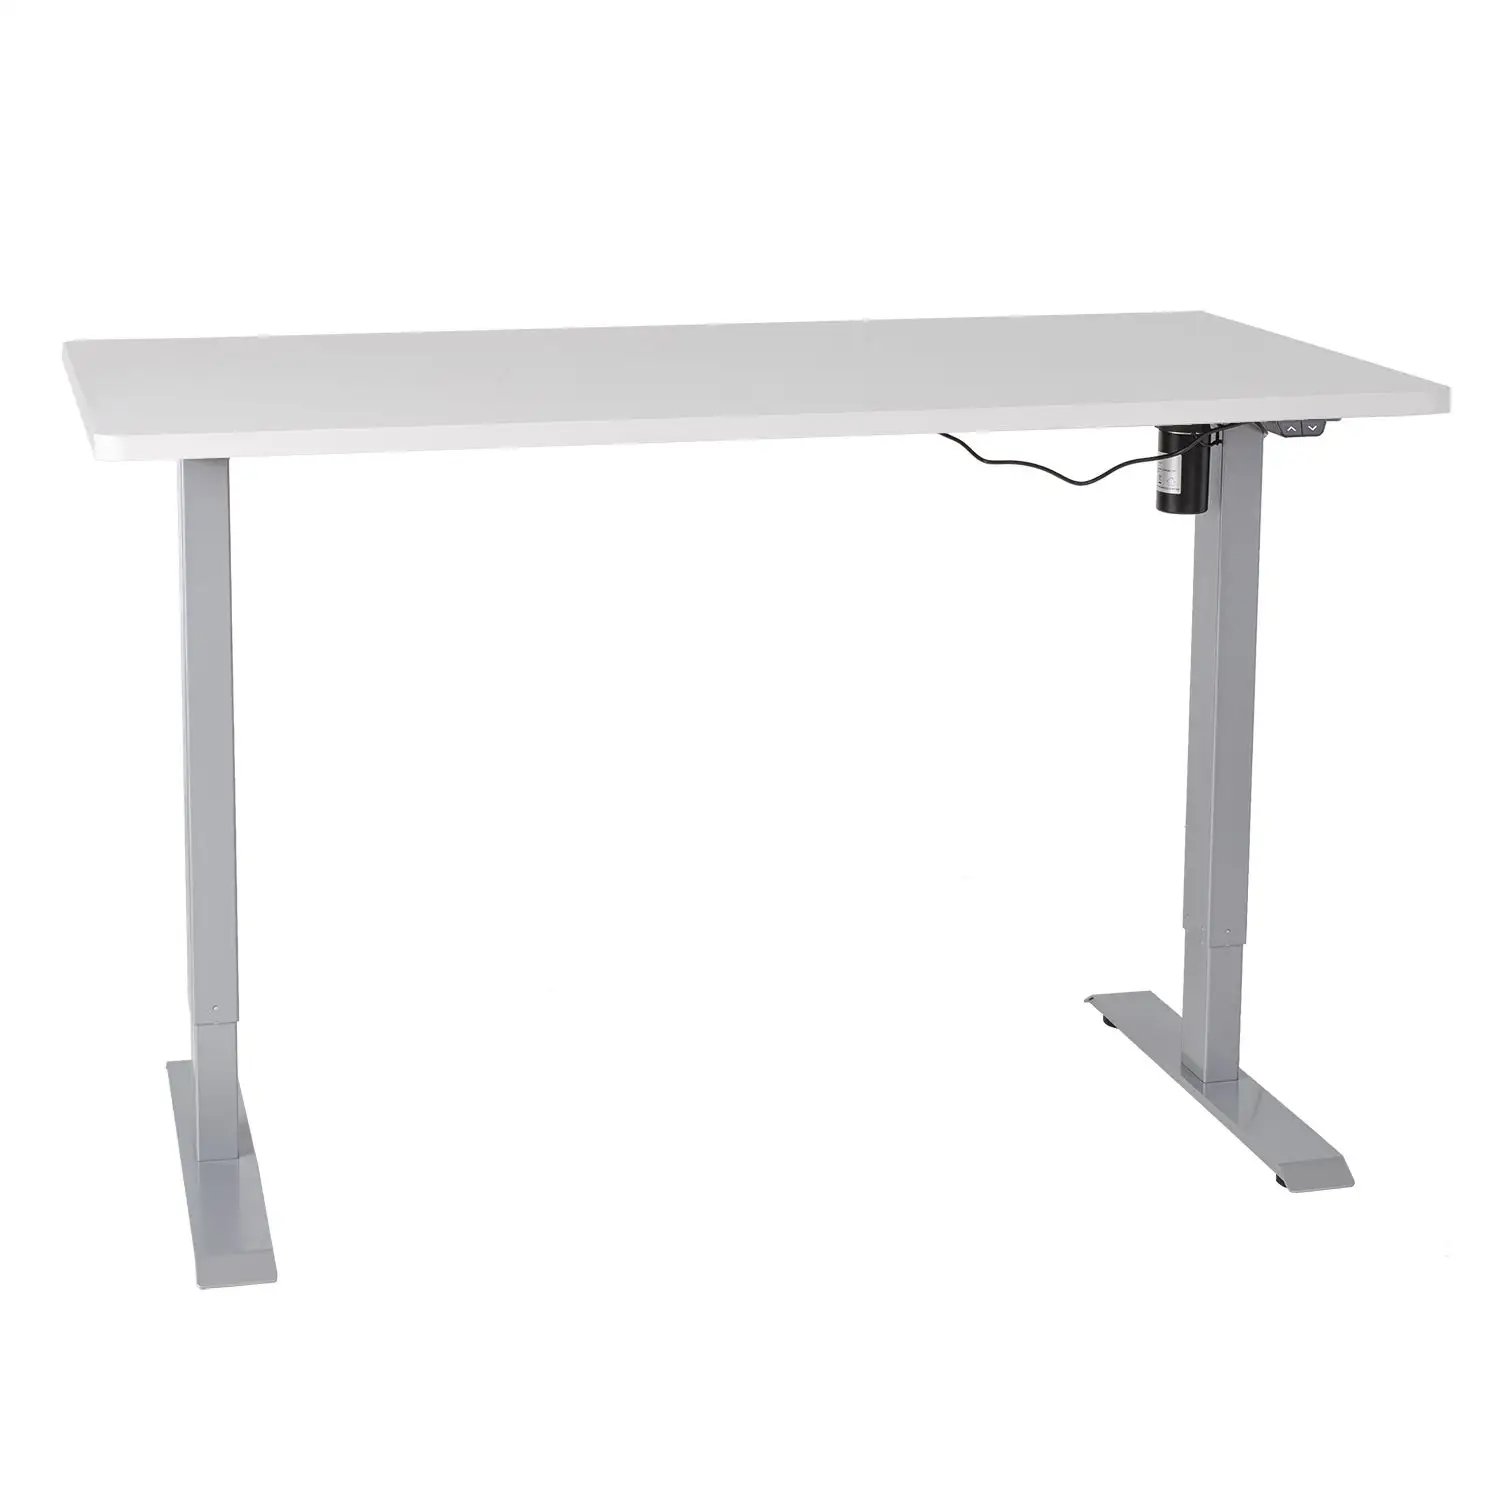 table Office desk ergo comfortable and keep healthy between stand and seat helpful back quiet quickly cal burned